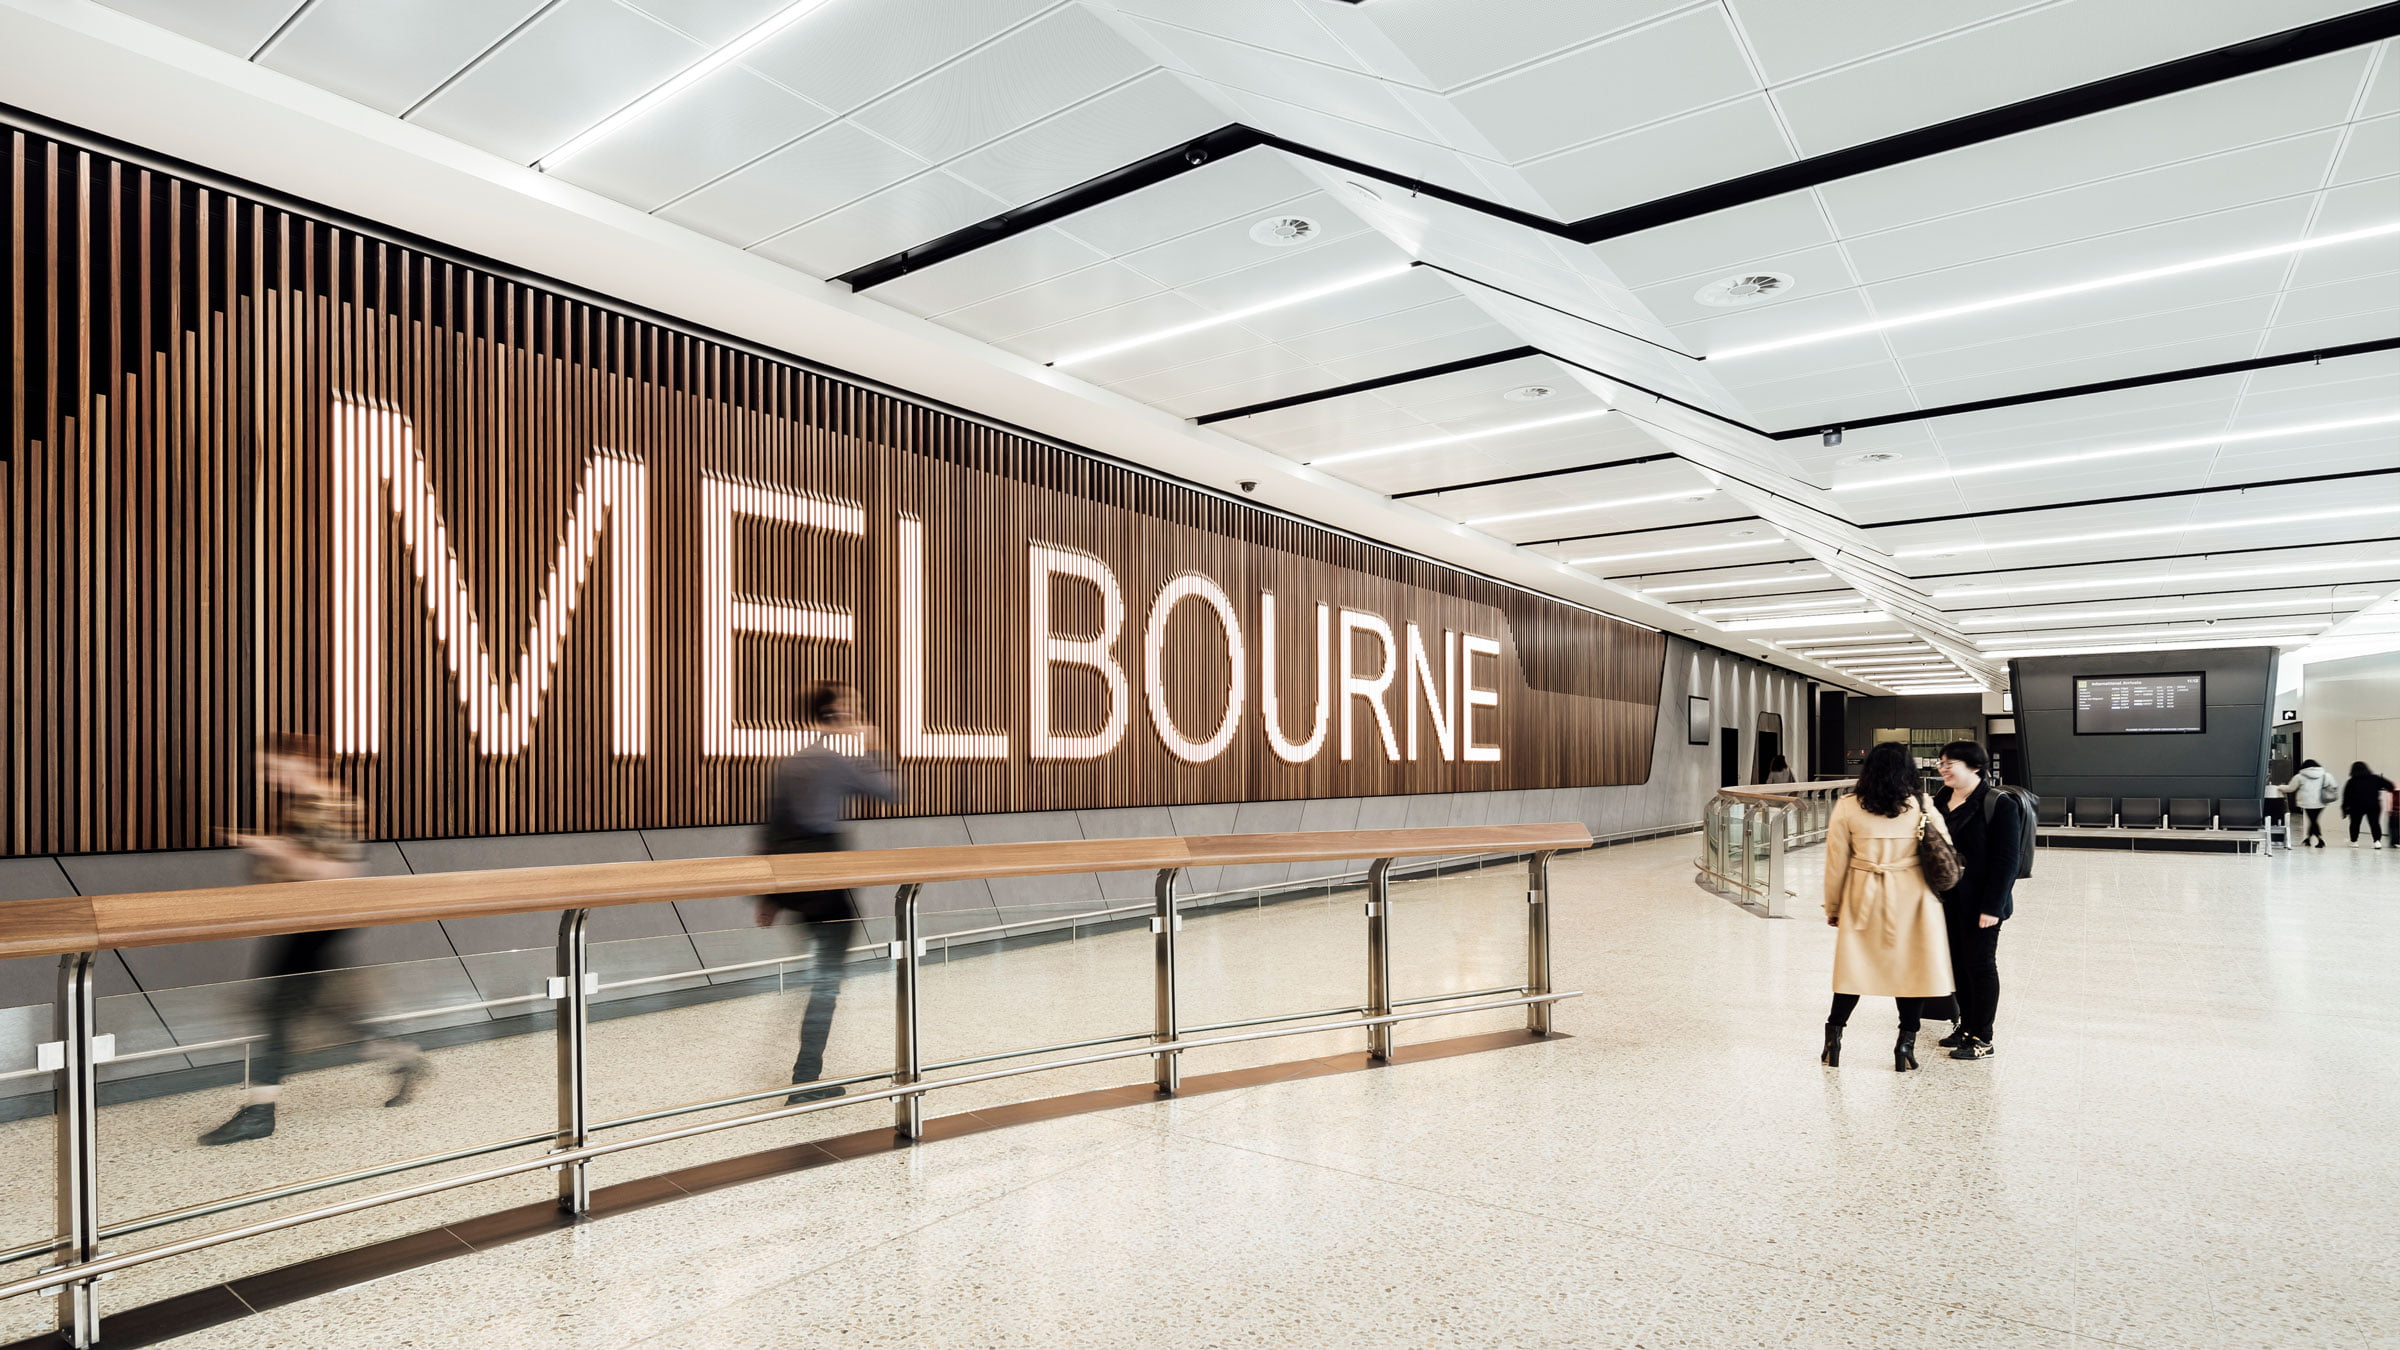 Melbourne Airport Advertising